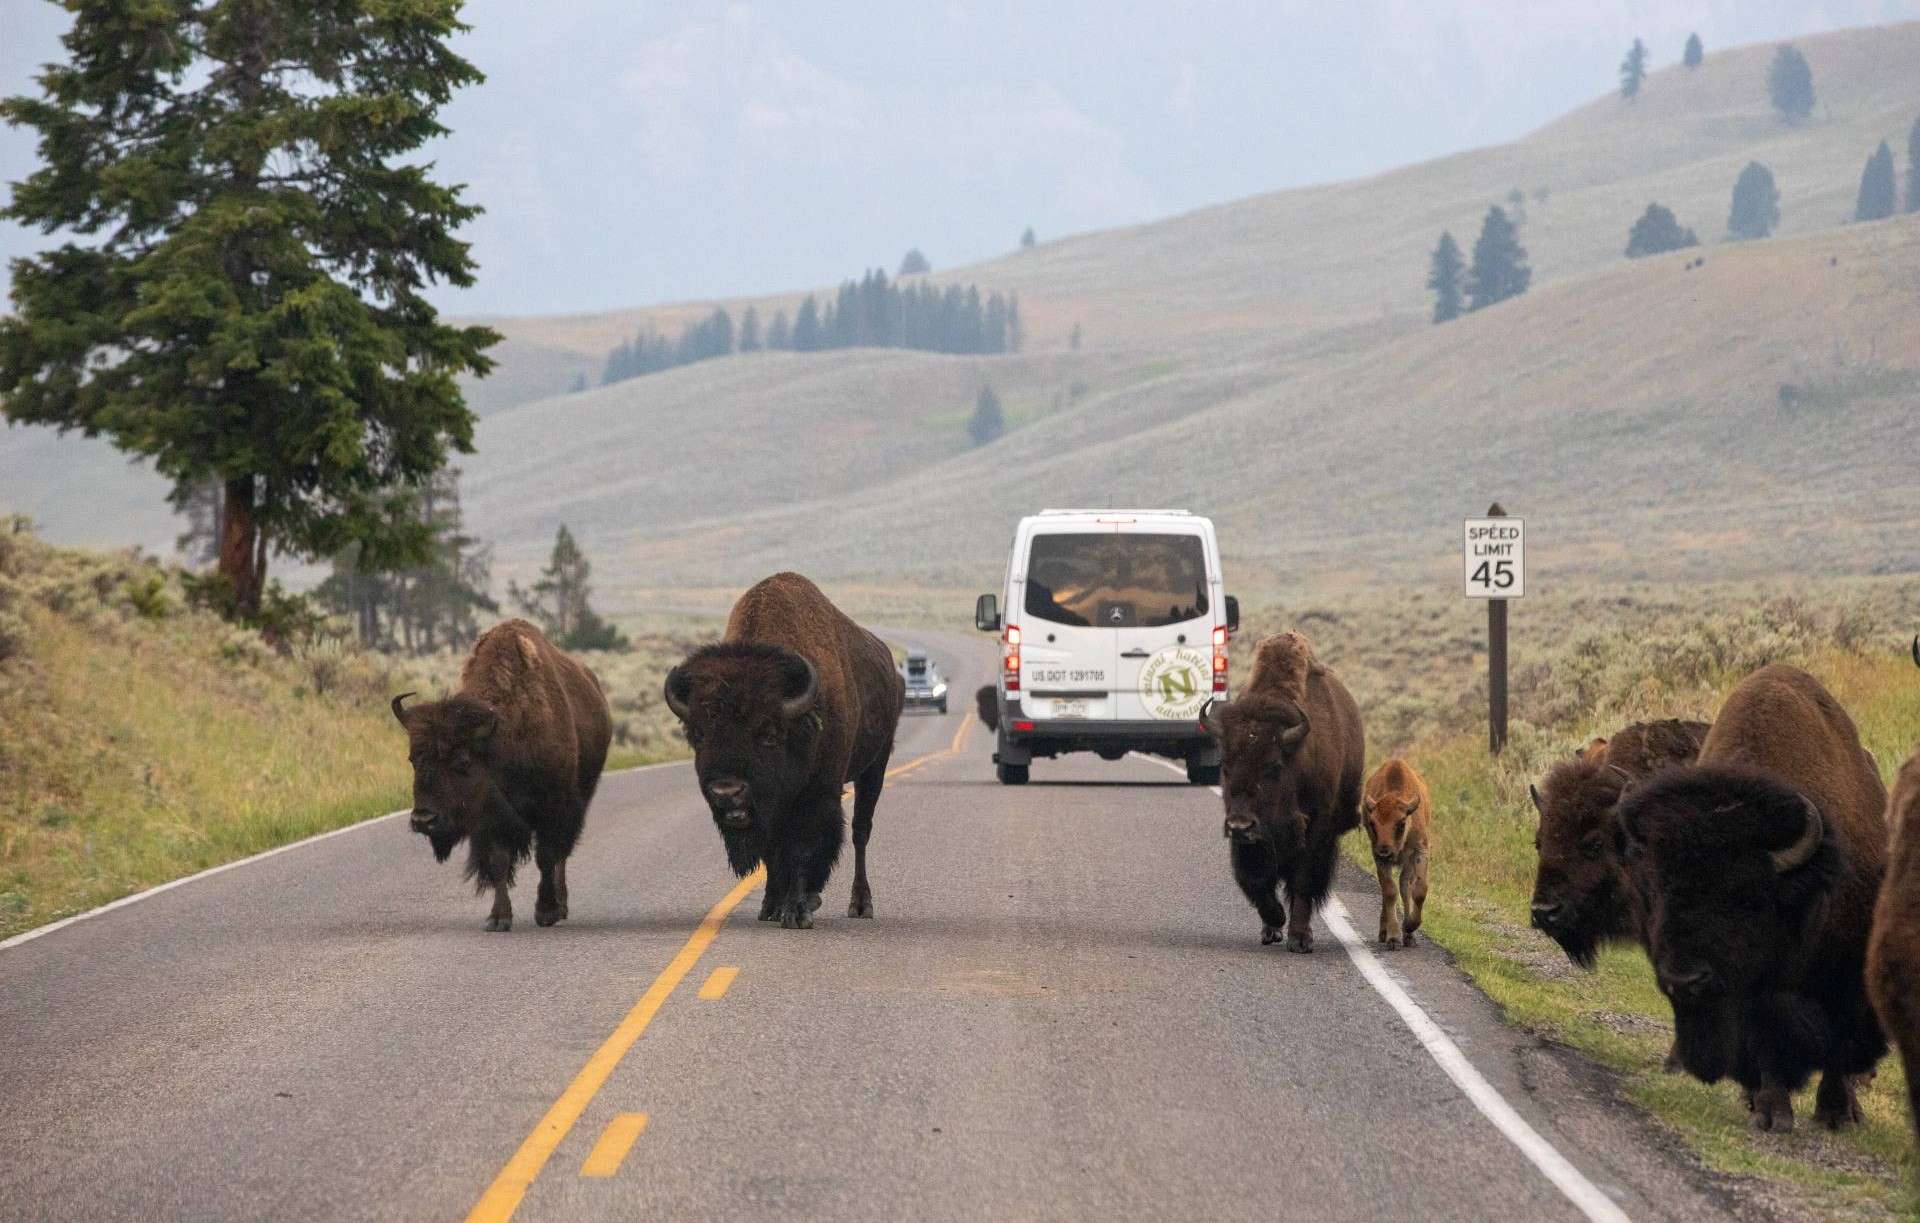 Bison jam in Yellowstone National Park by Jeremy Covert